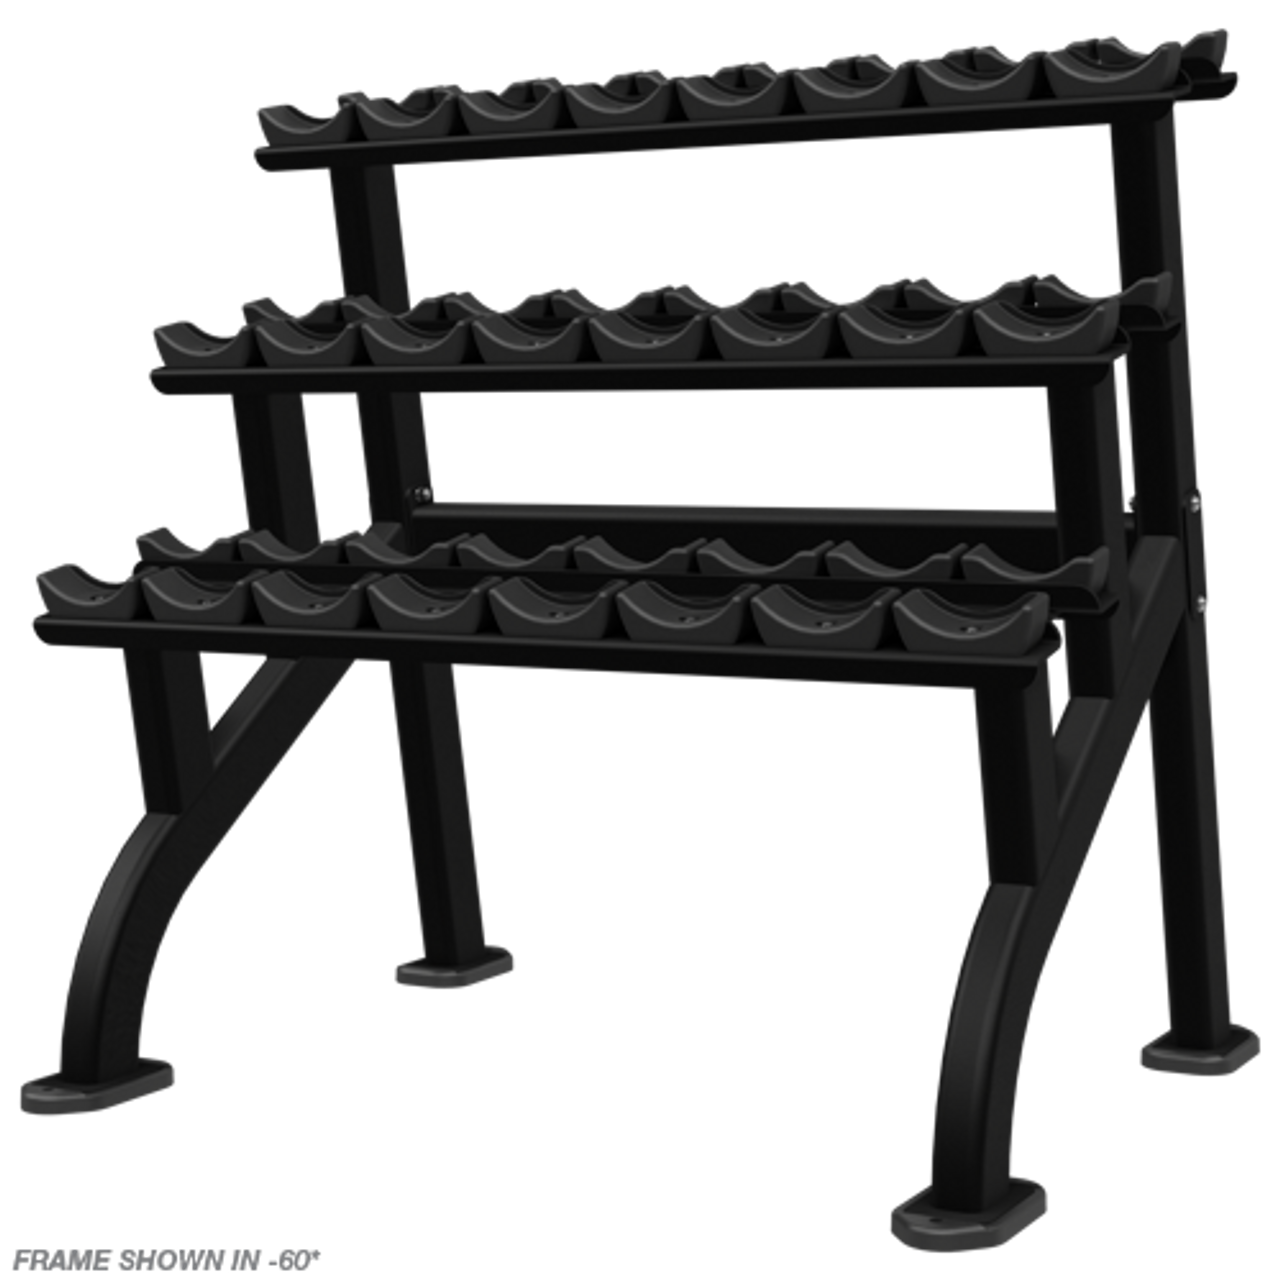 https://cdn11.bigcommerce.com/s-qtce6r5p/images/stencil/1280x1280/products/4453/26259/Benches__Racks_Beauty_Bell_Rack-60__82035.1662495290.png?c=3